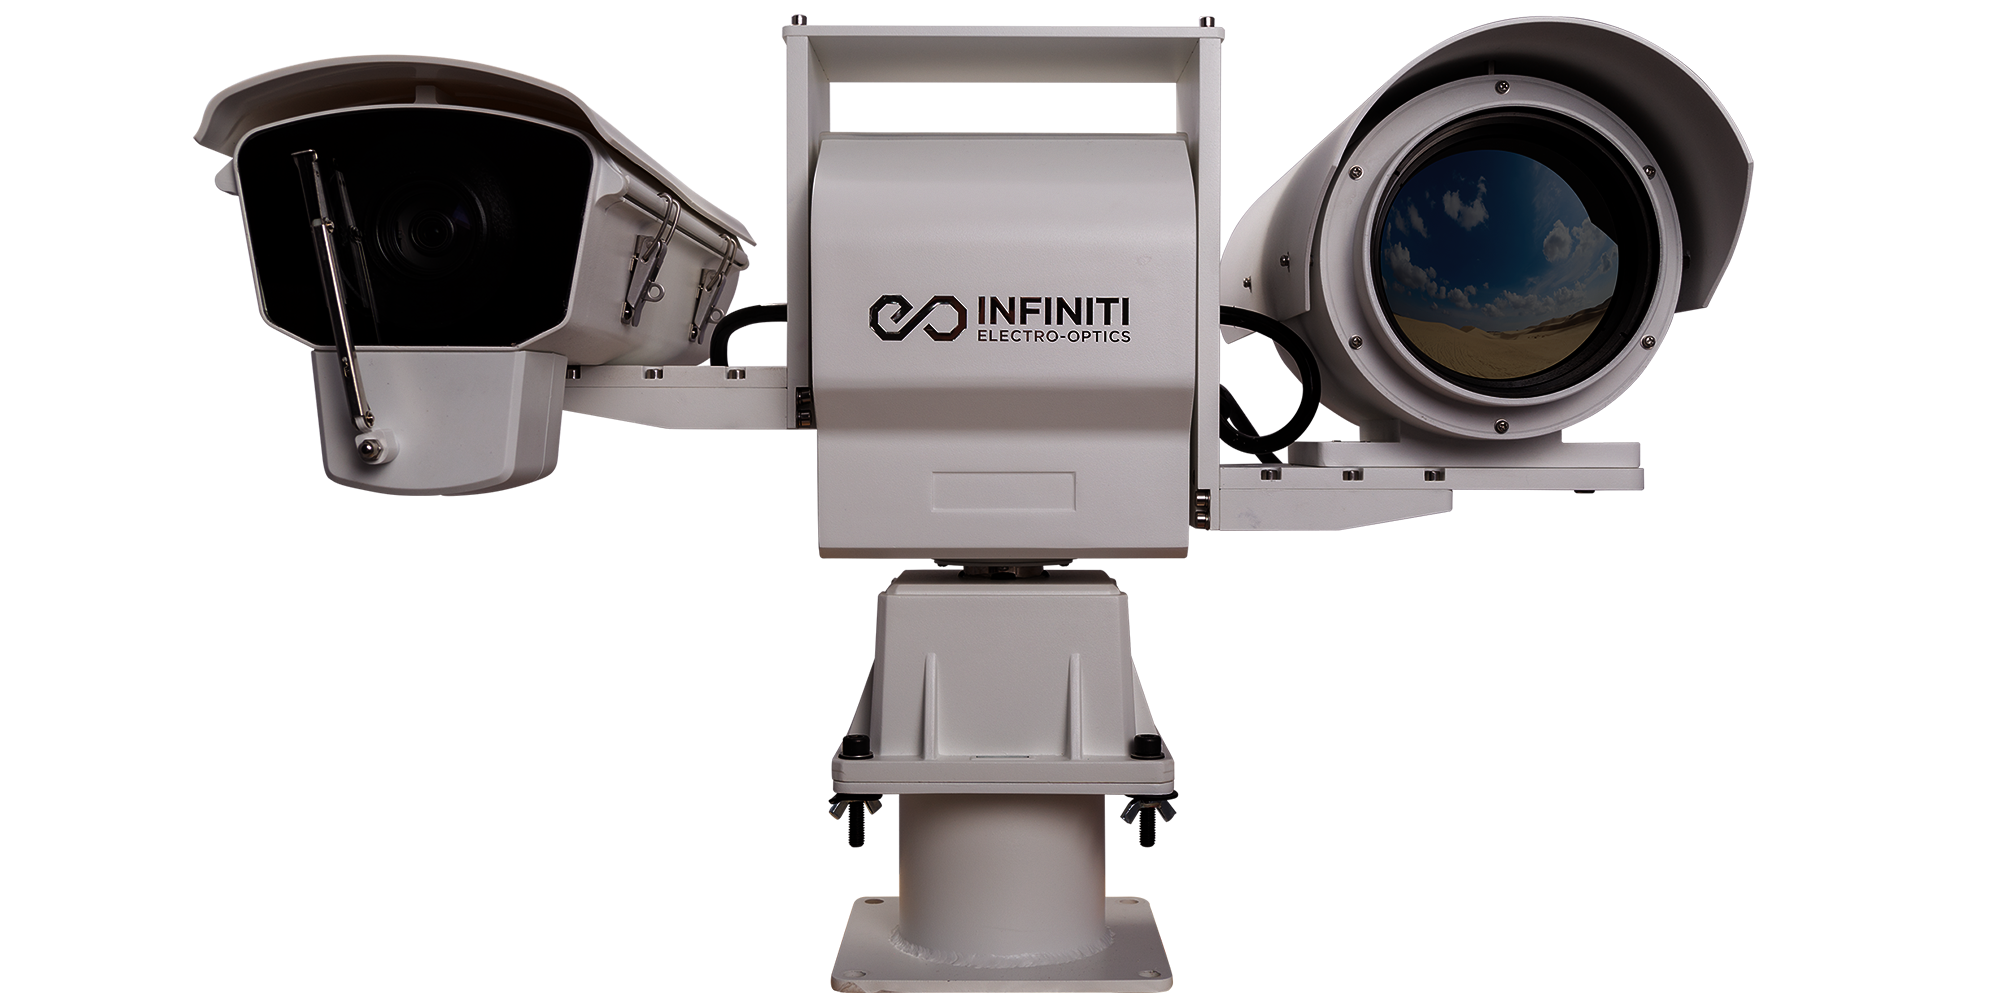 Sentry PTZ Surveillance Camera System with 30X Optical Zoom Lens and 155mm Thermal Imaging